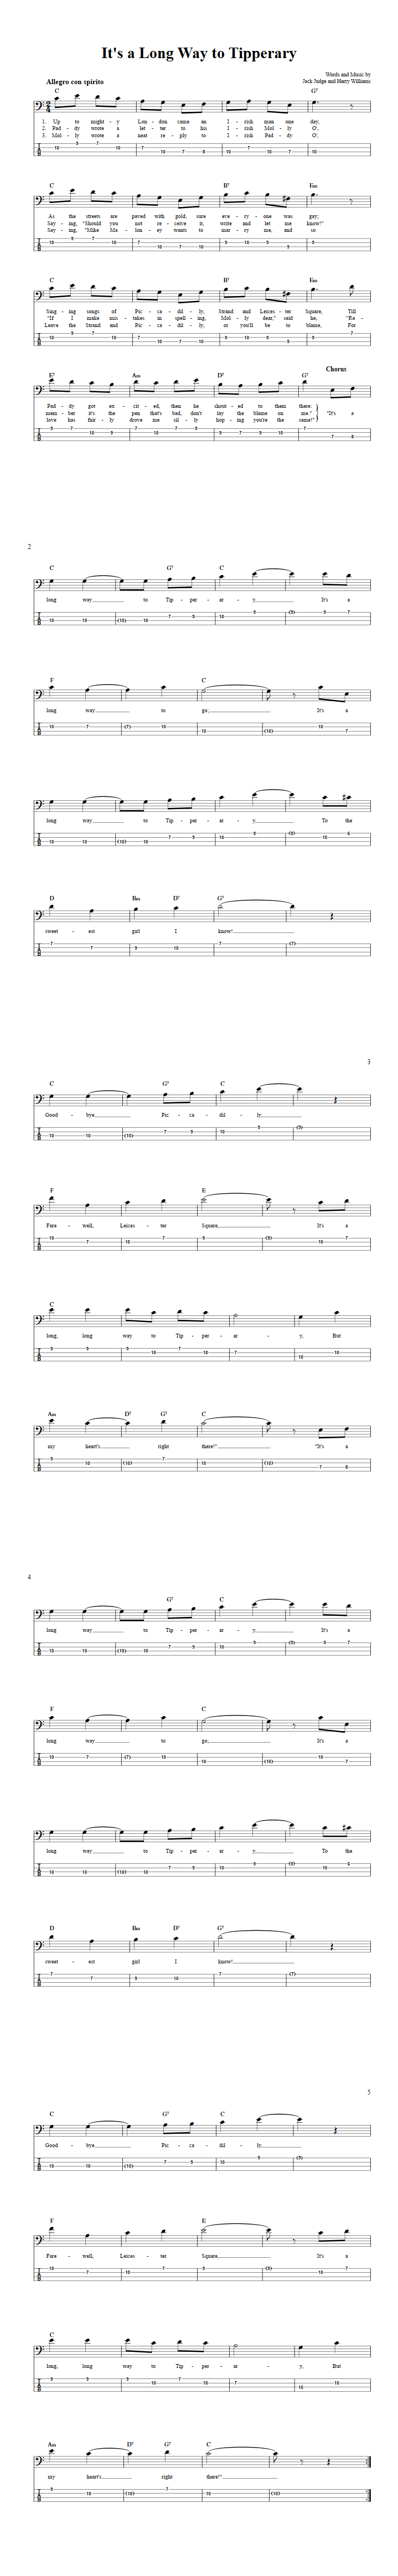 It's a Long Way to Tipperary  Bass Guitar Tab